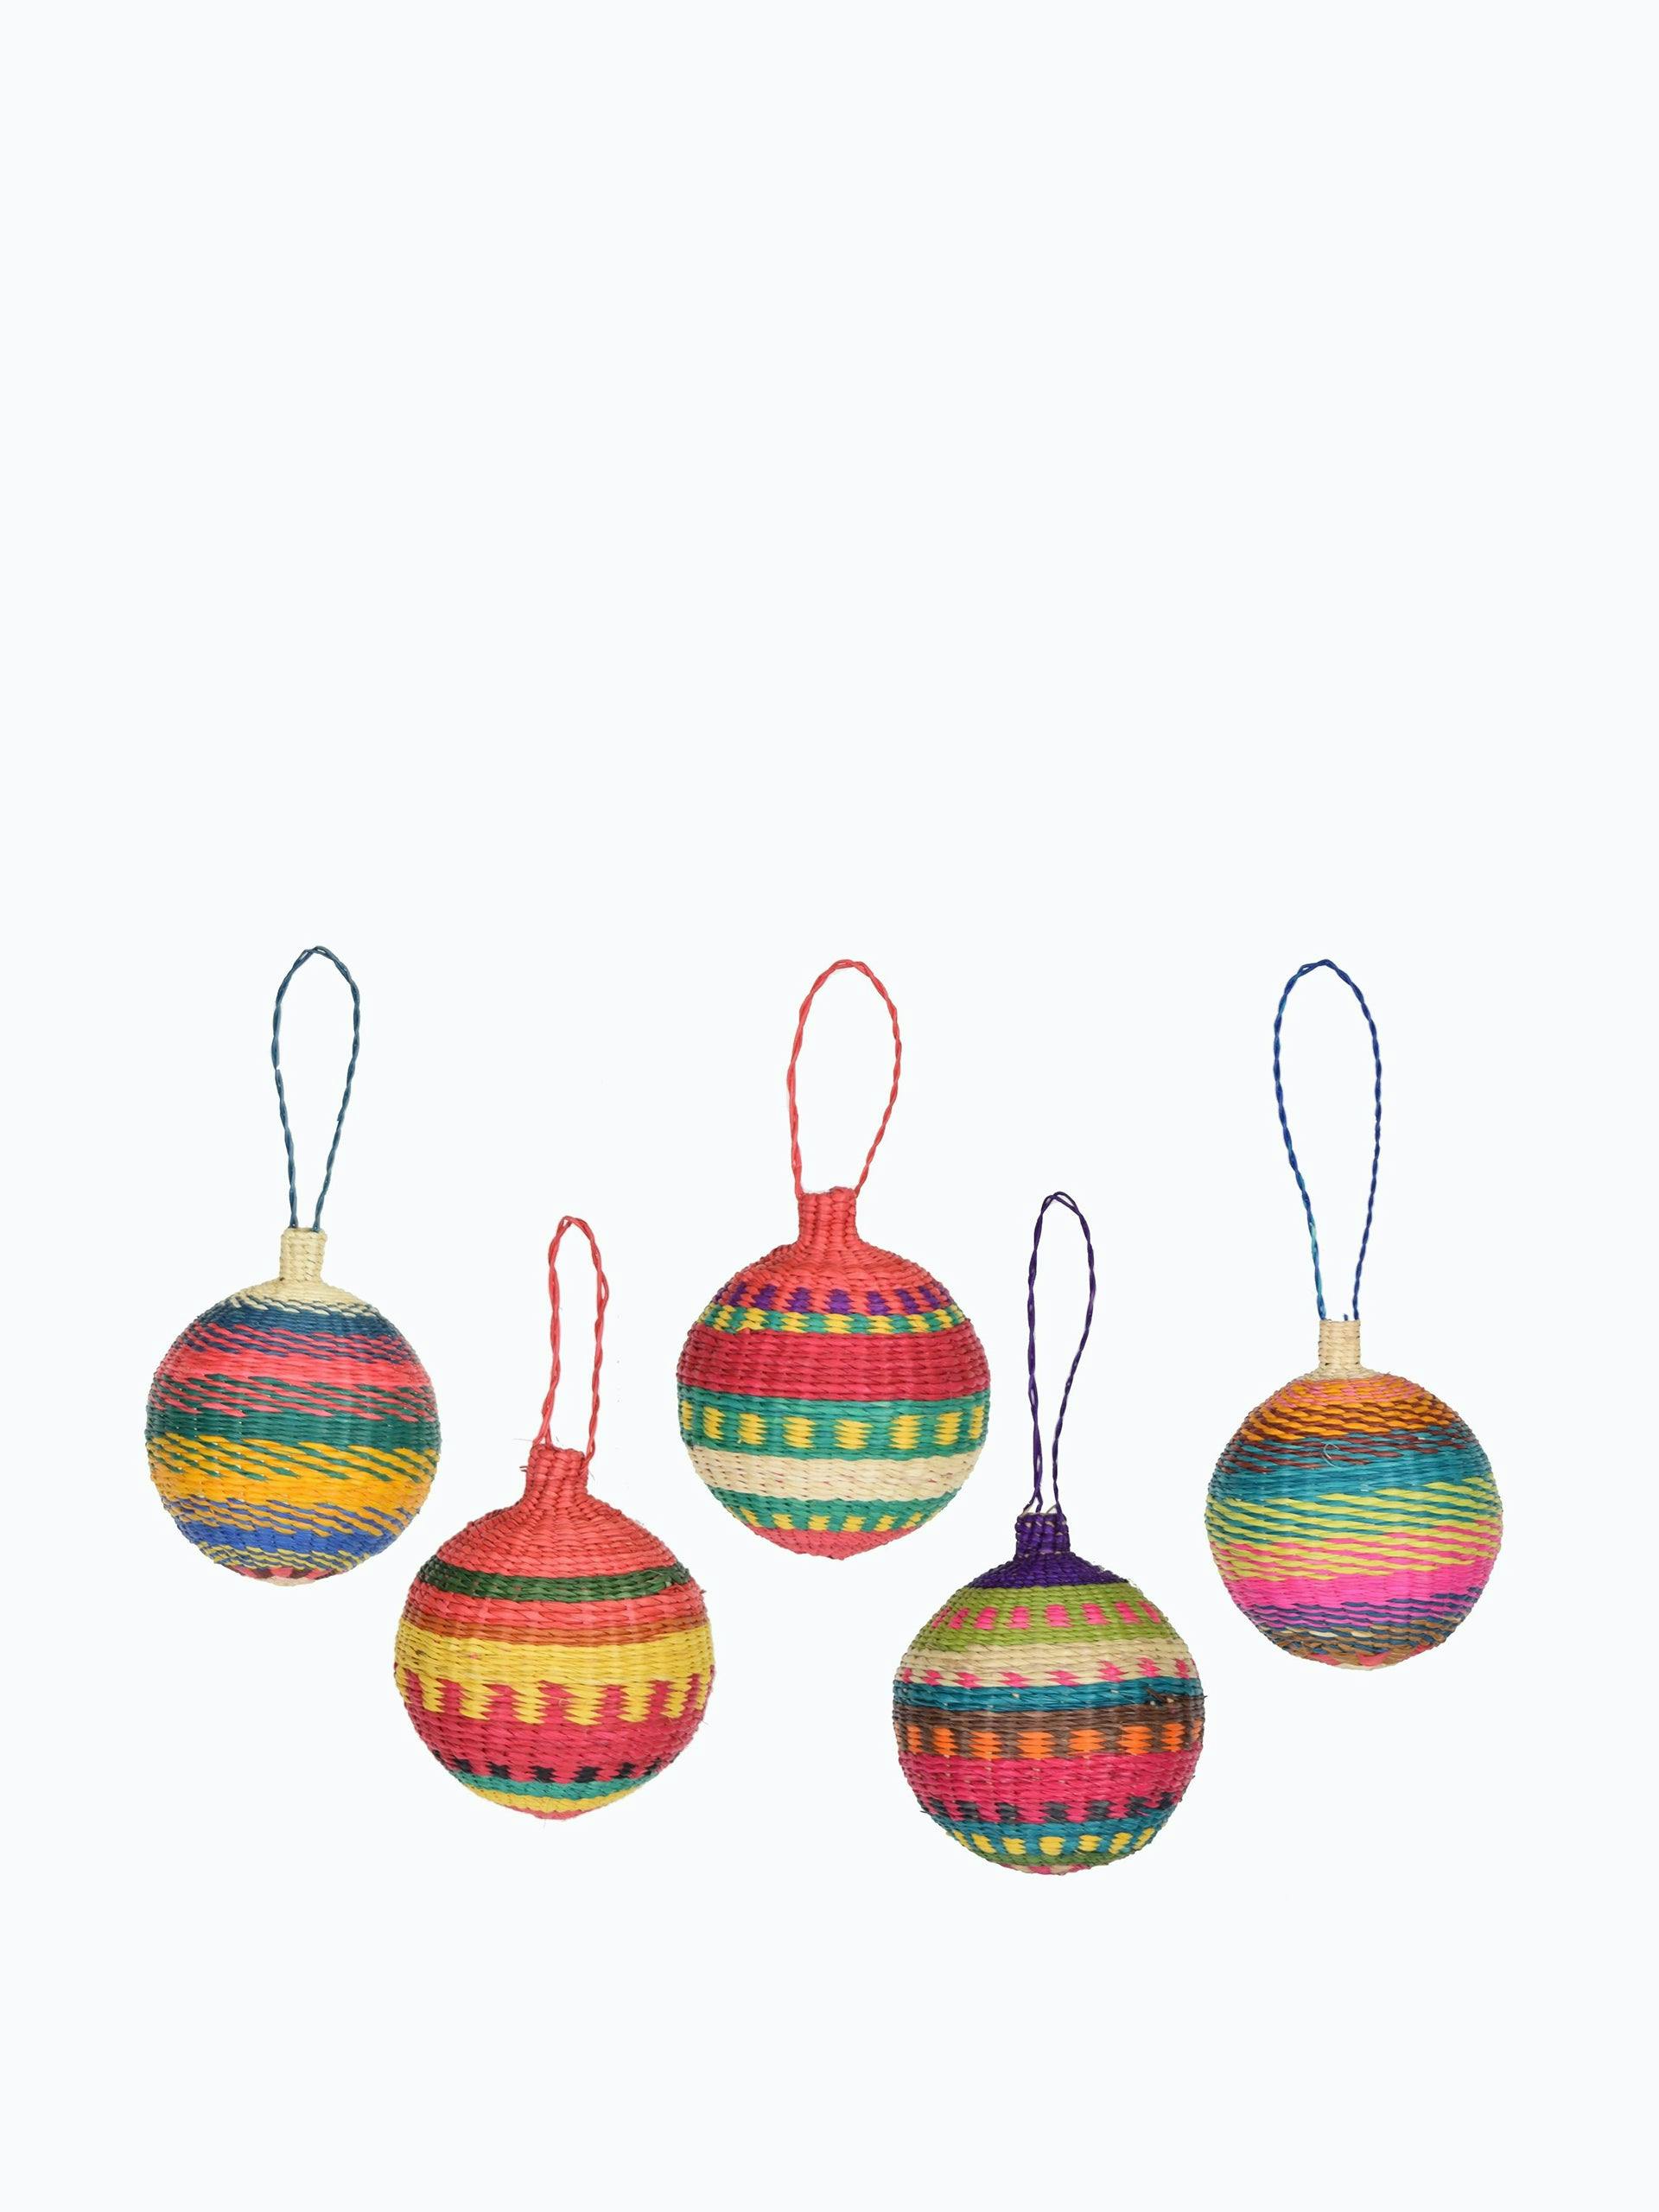 Colombian string baubles